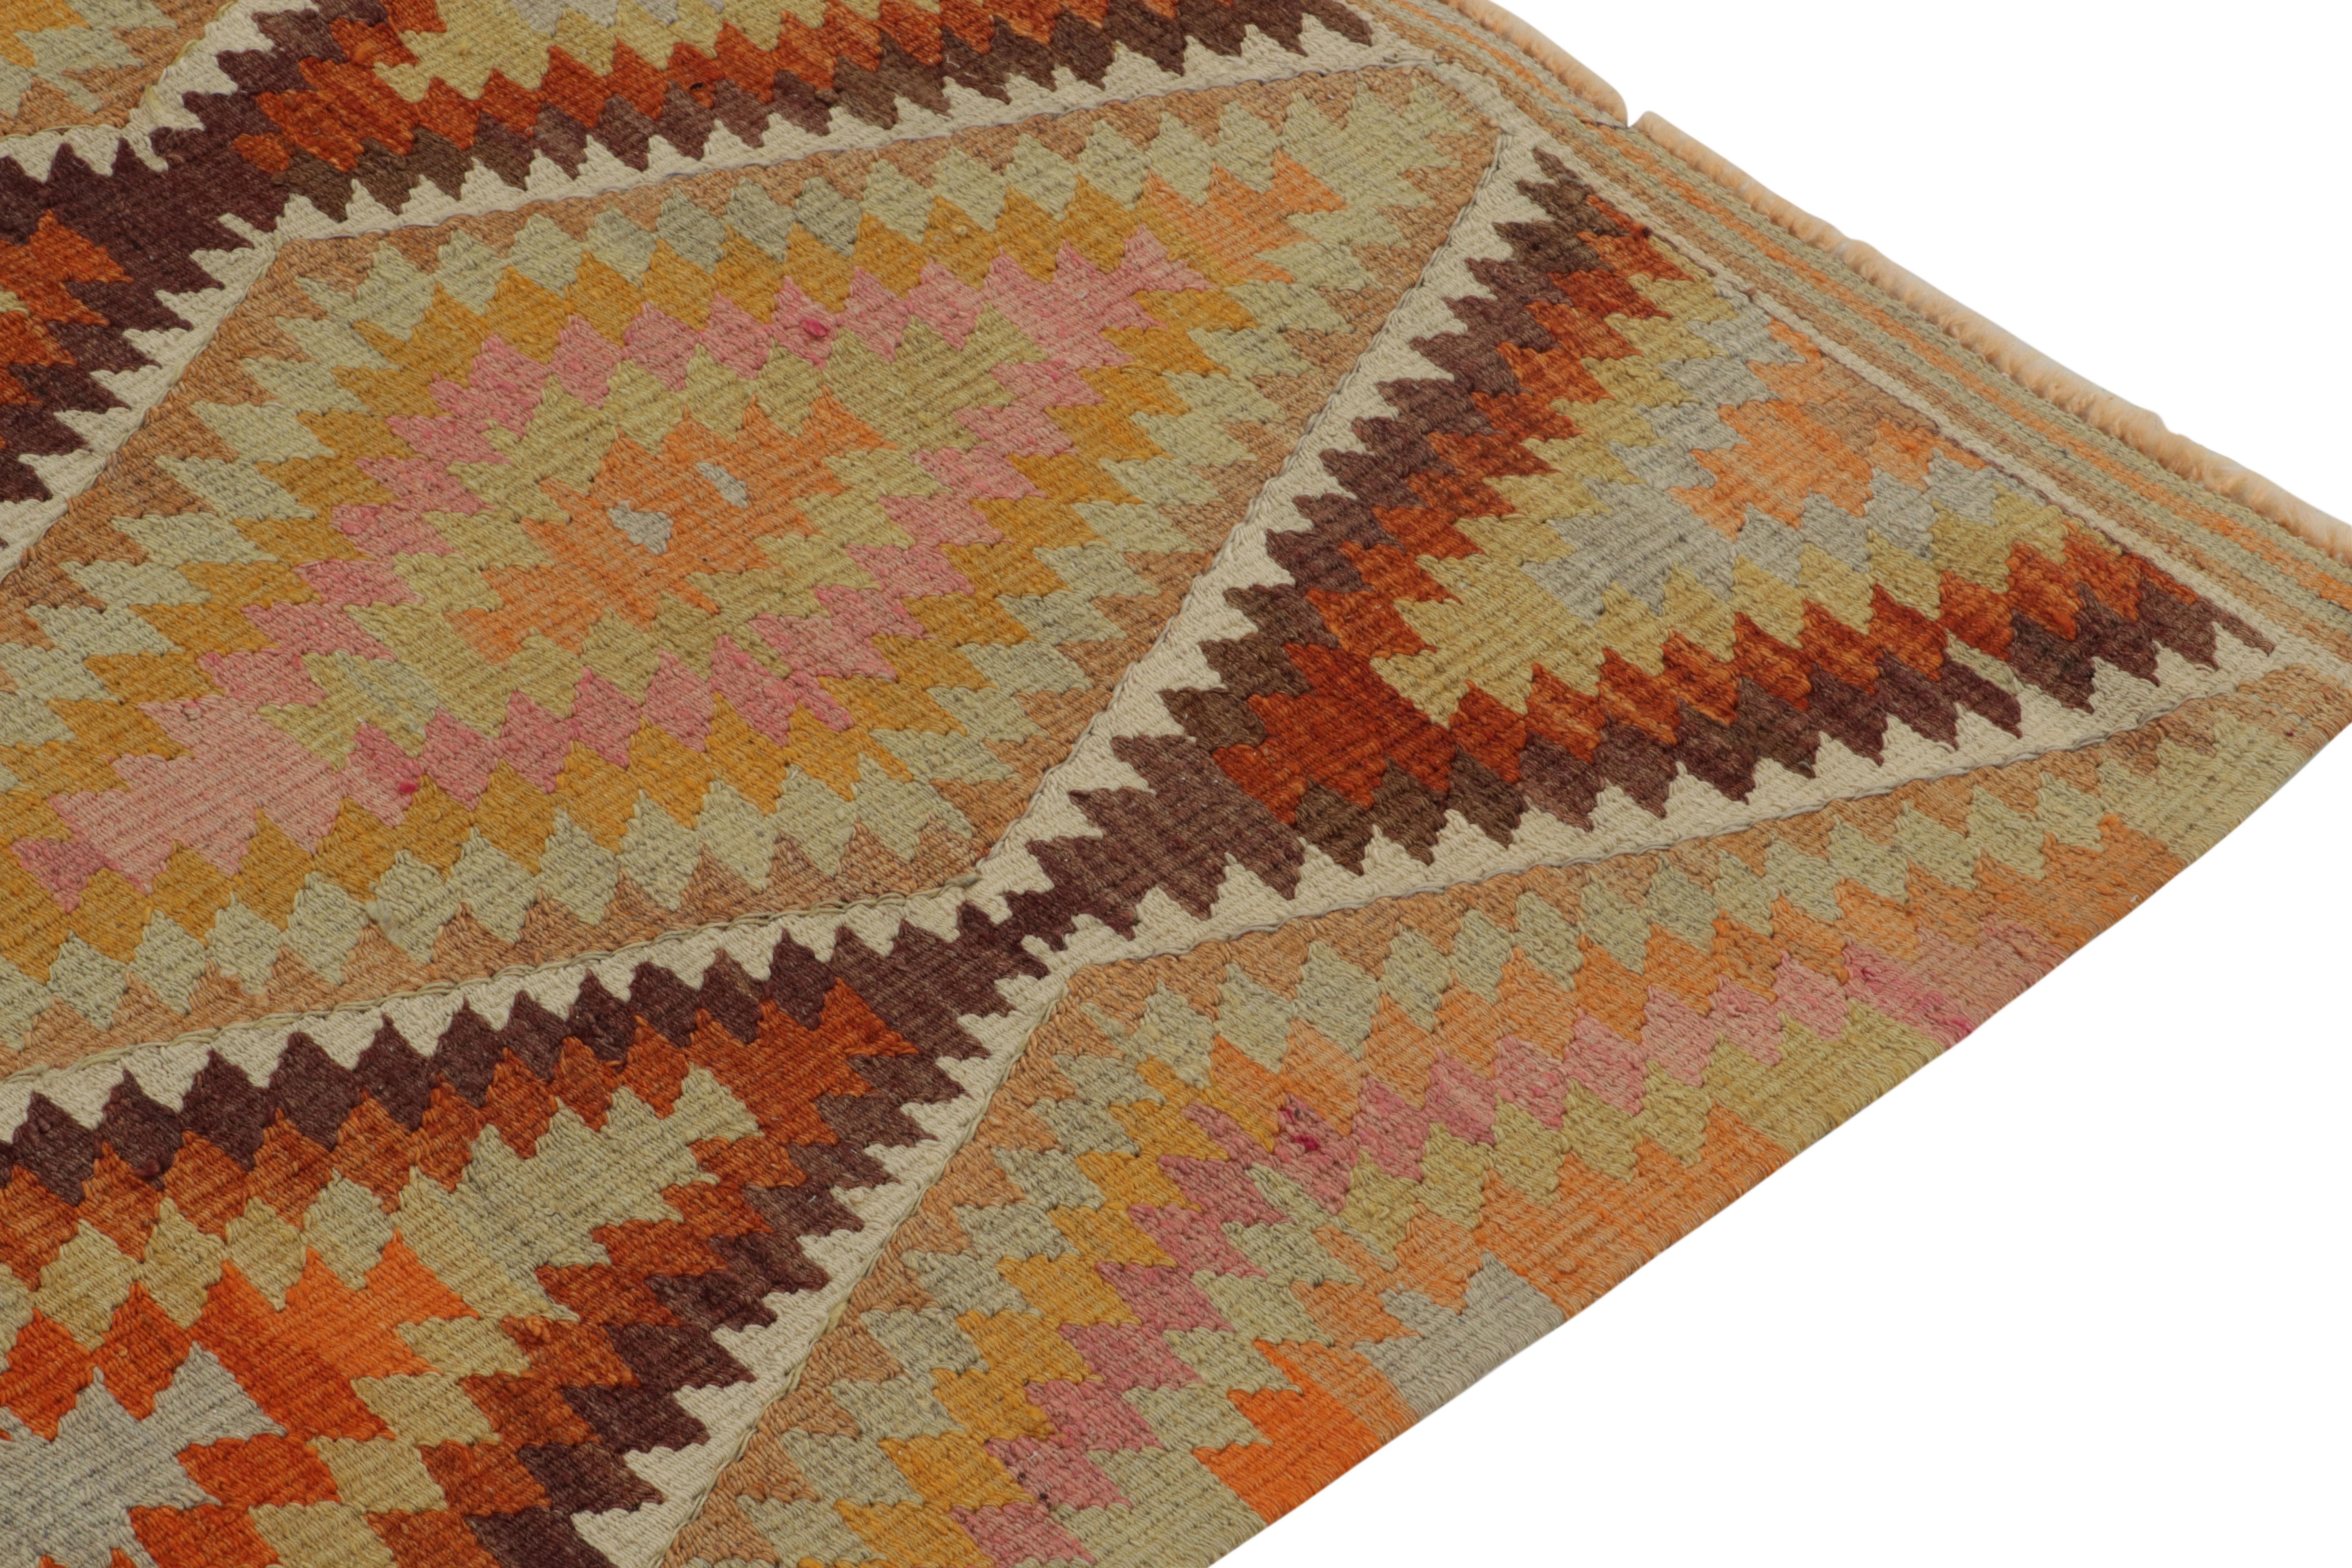 1950s Vintage Turkish Kilim rug in Orange, Gold Geometric Pattern by Rug & Kilim In Good Condition For Sale In Long Island City, NY